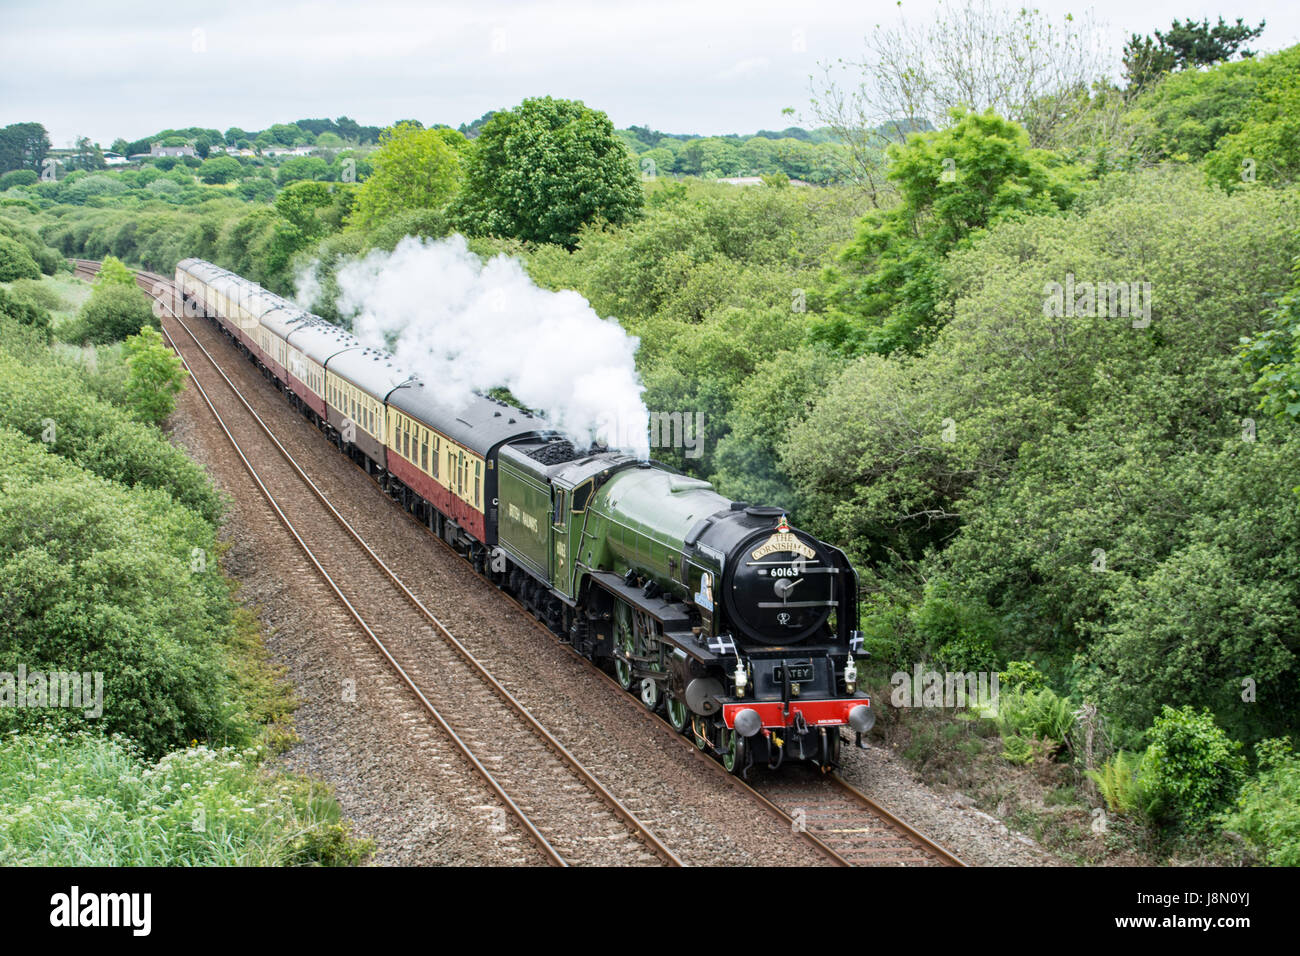 Marazion, Cornwall, UK. 29th May 2017. The Tornado steam train seen here coming through Marazion on it's last few miles before completing it's bank holiday Monday journey from Paddington station to Penzance railway station in Cornwall. Credit: Simon Maycock/Alamy Live News Stock Photo